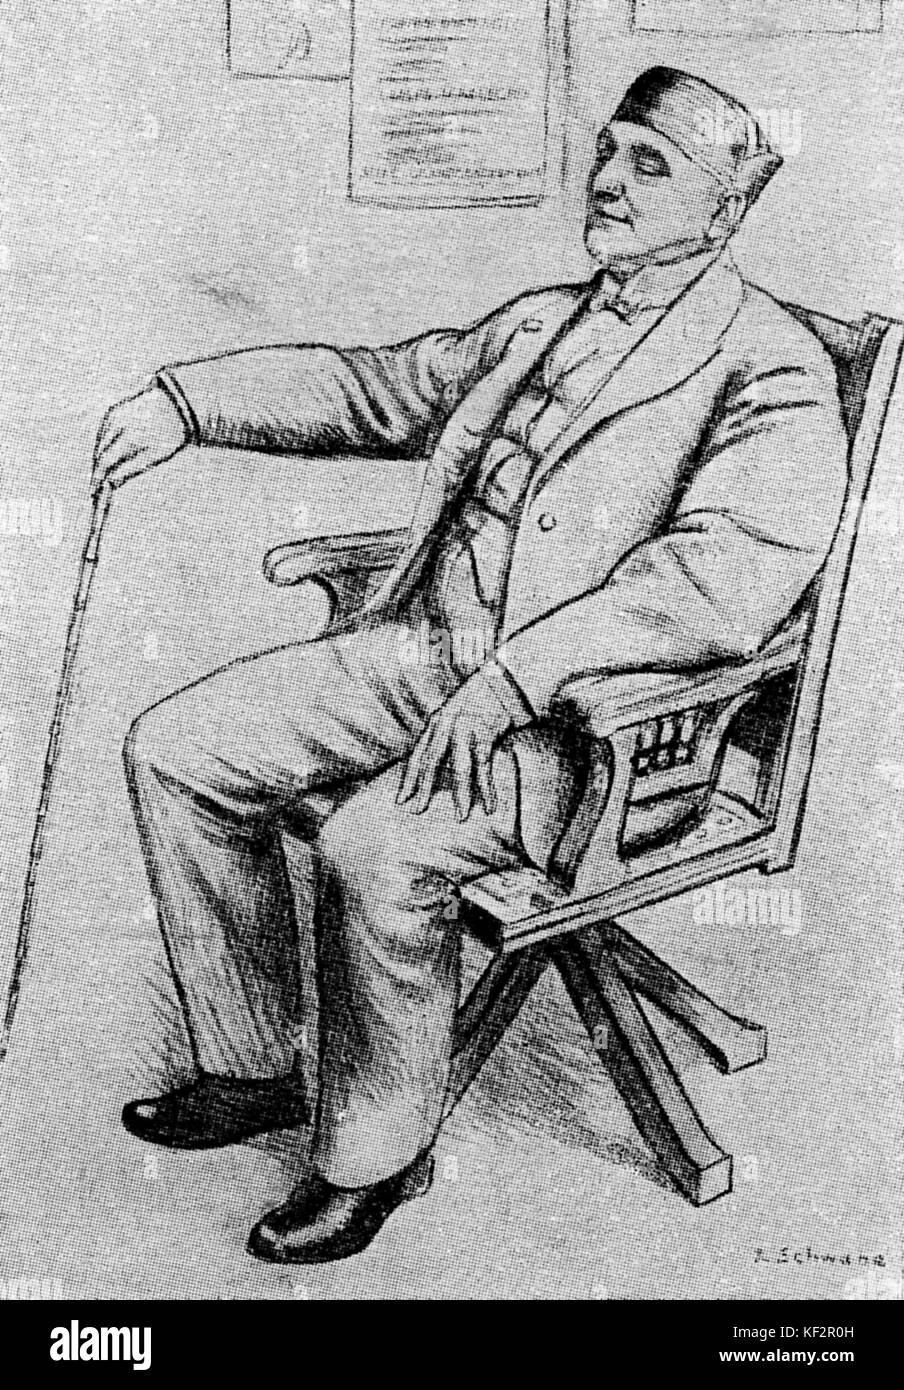 Maestro Enrico Cecchetti, seated and holding a cane. Worked as a ballet master and mime for Diaghilev 's Ballet Russes.  EC:  Italian ballet dancer, mime, founder of the Cecchetti method, 21 June 1850 – 13 November 1928. After original drawing by Swabe. Stock Photo